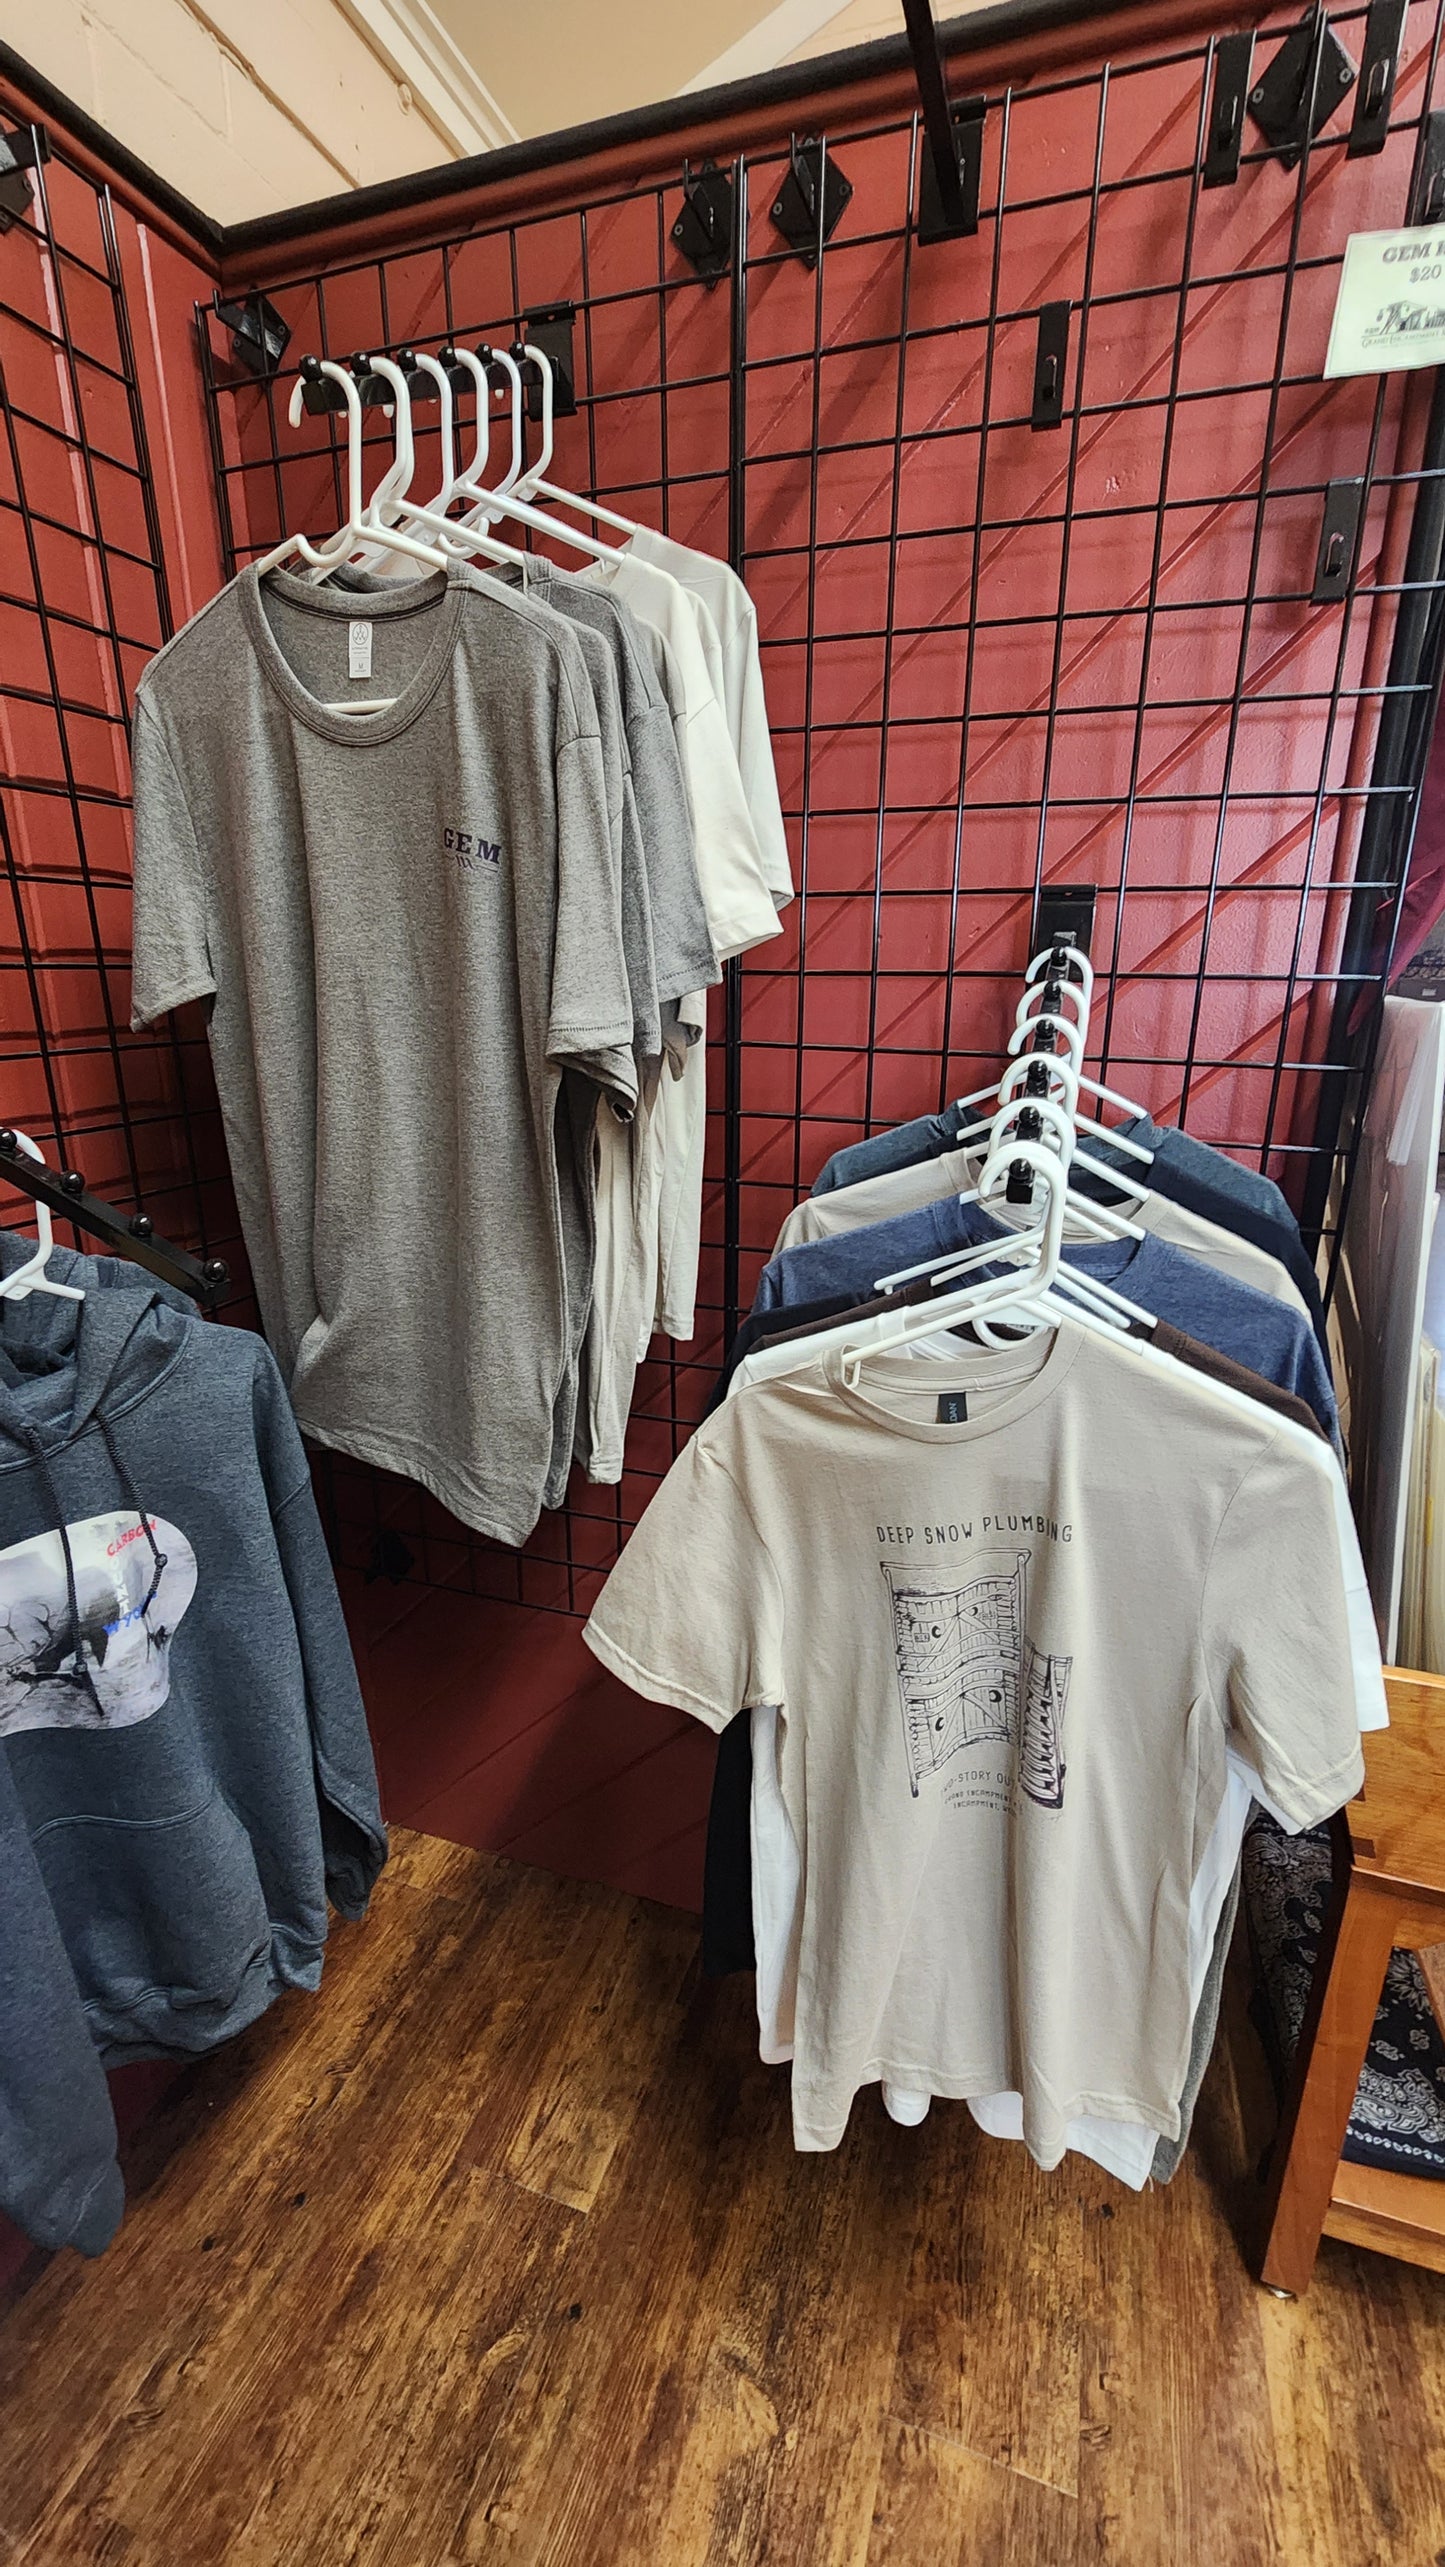 Adult T Shirts - All Sizes